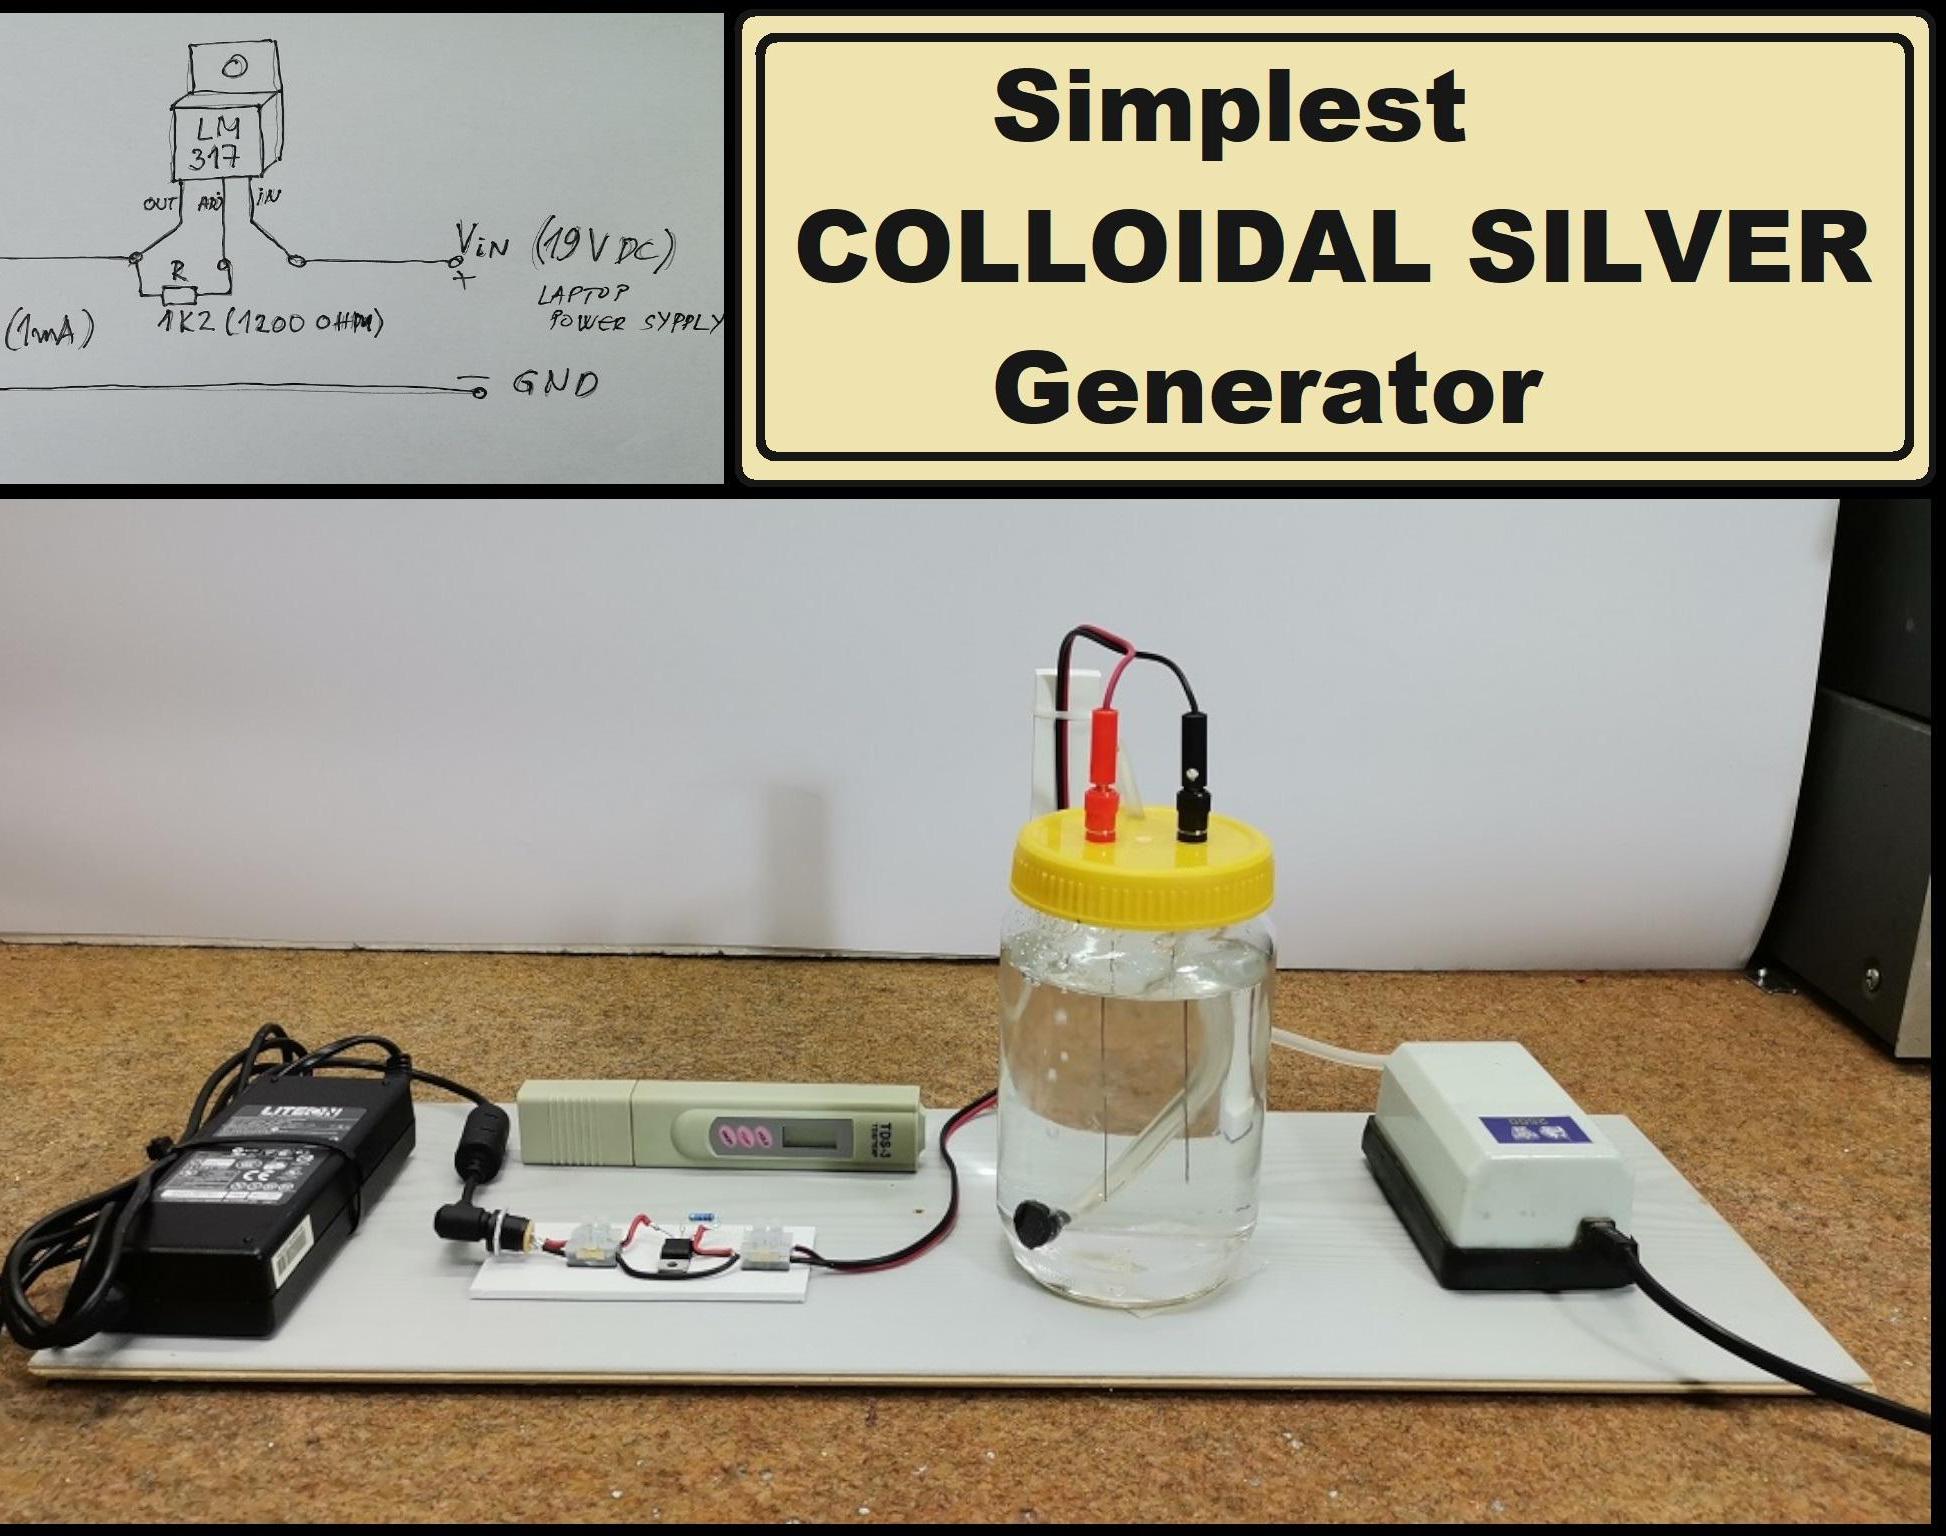 How to Make Simplest Colloidal Silver Generator